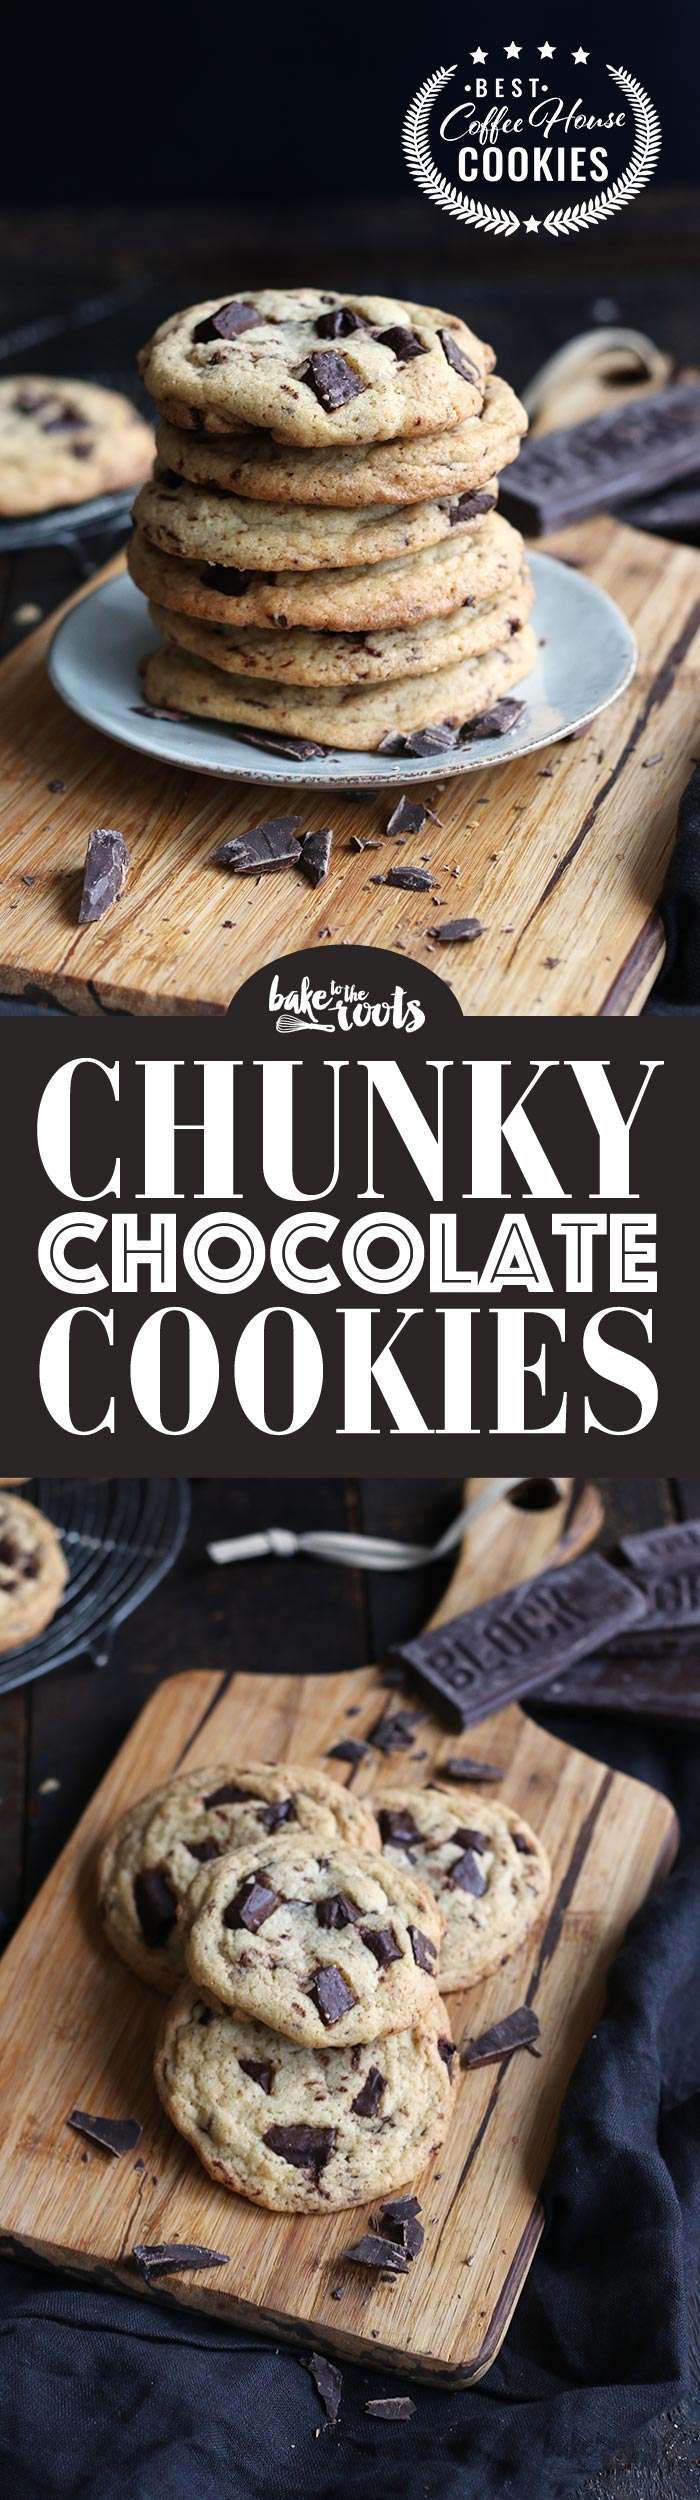 Delicious Chocolate Chip Cookies with large chunks of chocolate | Bake to the roots